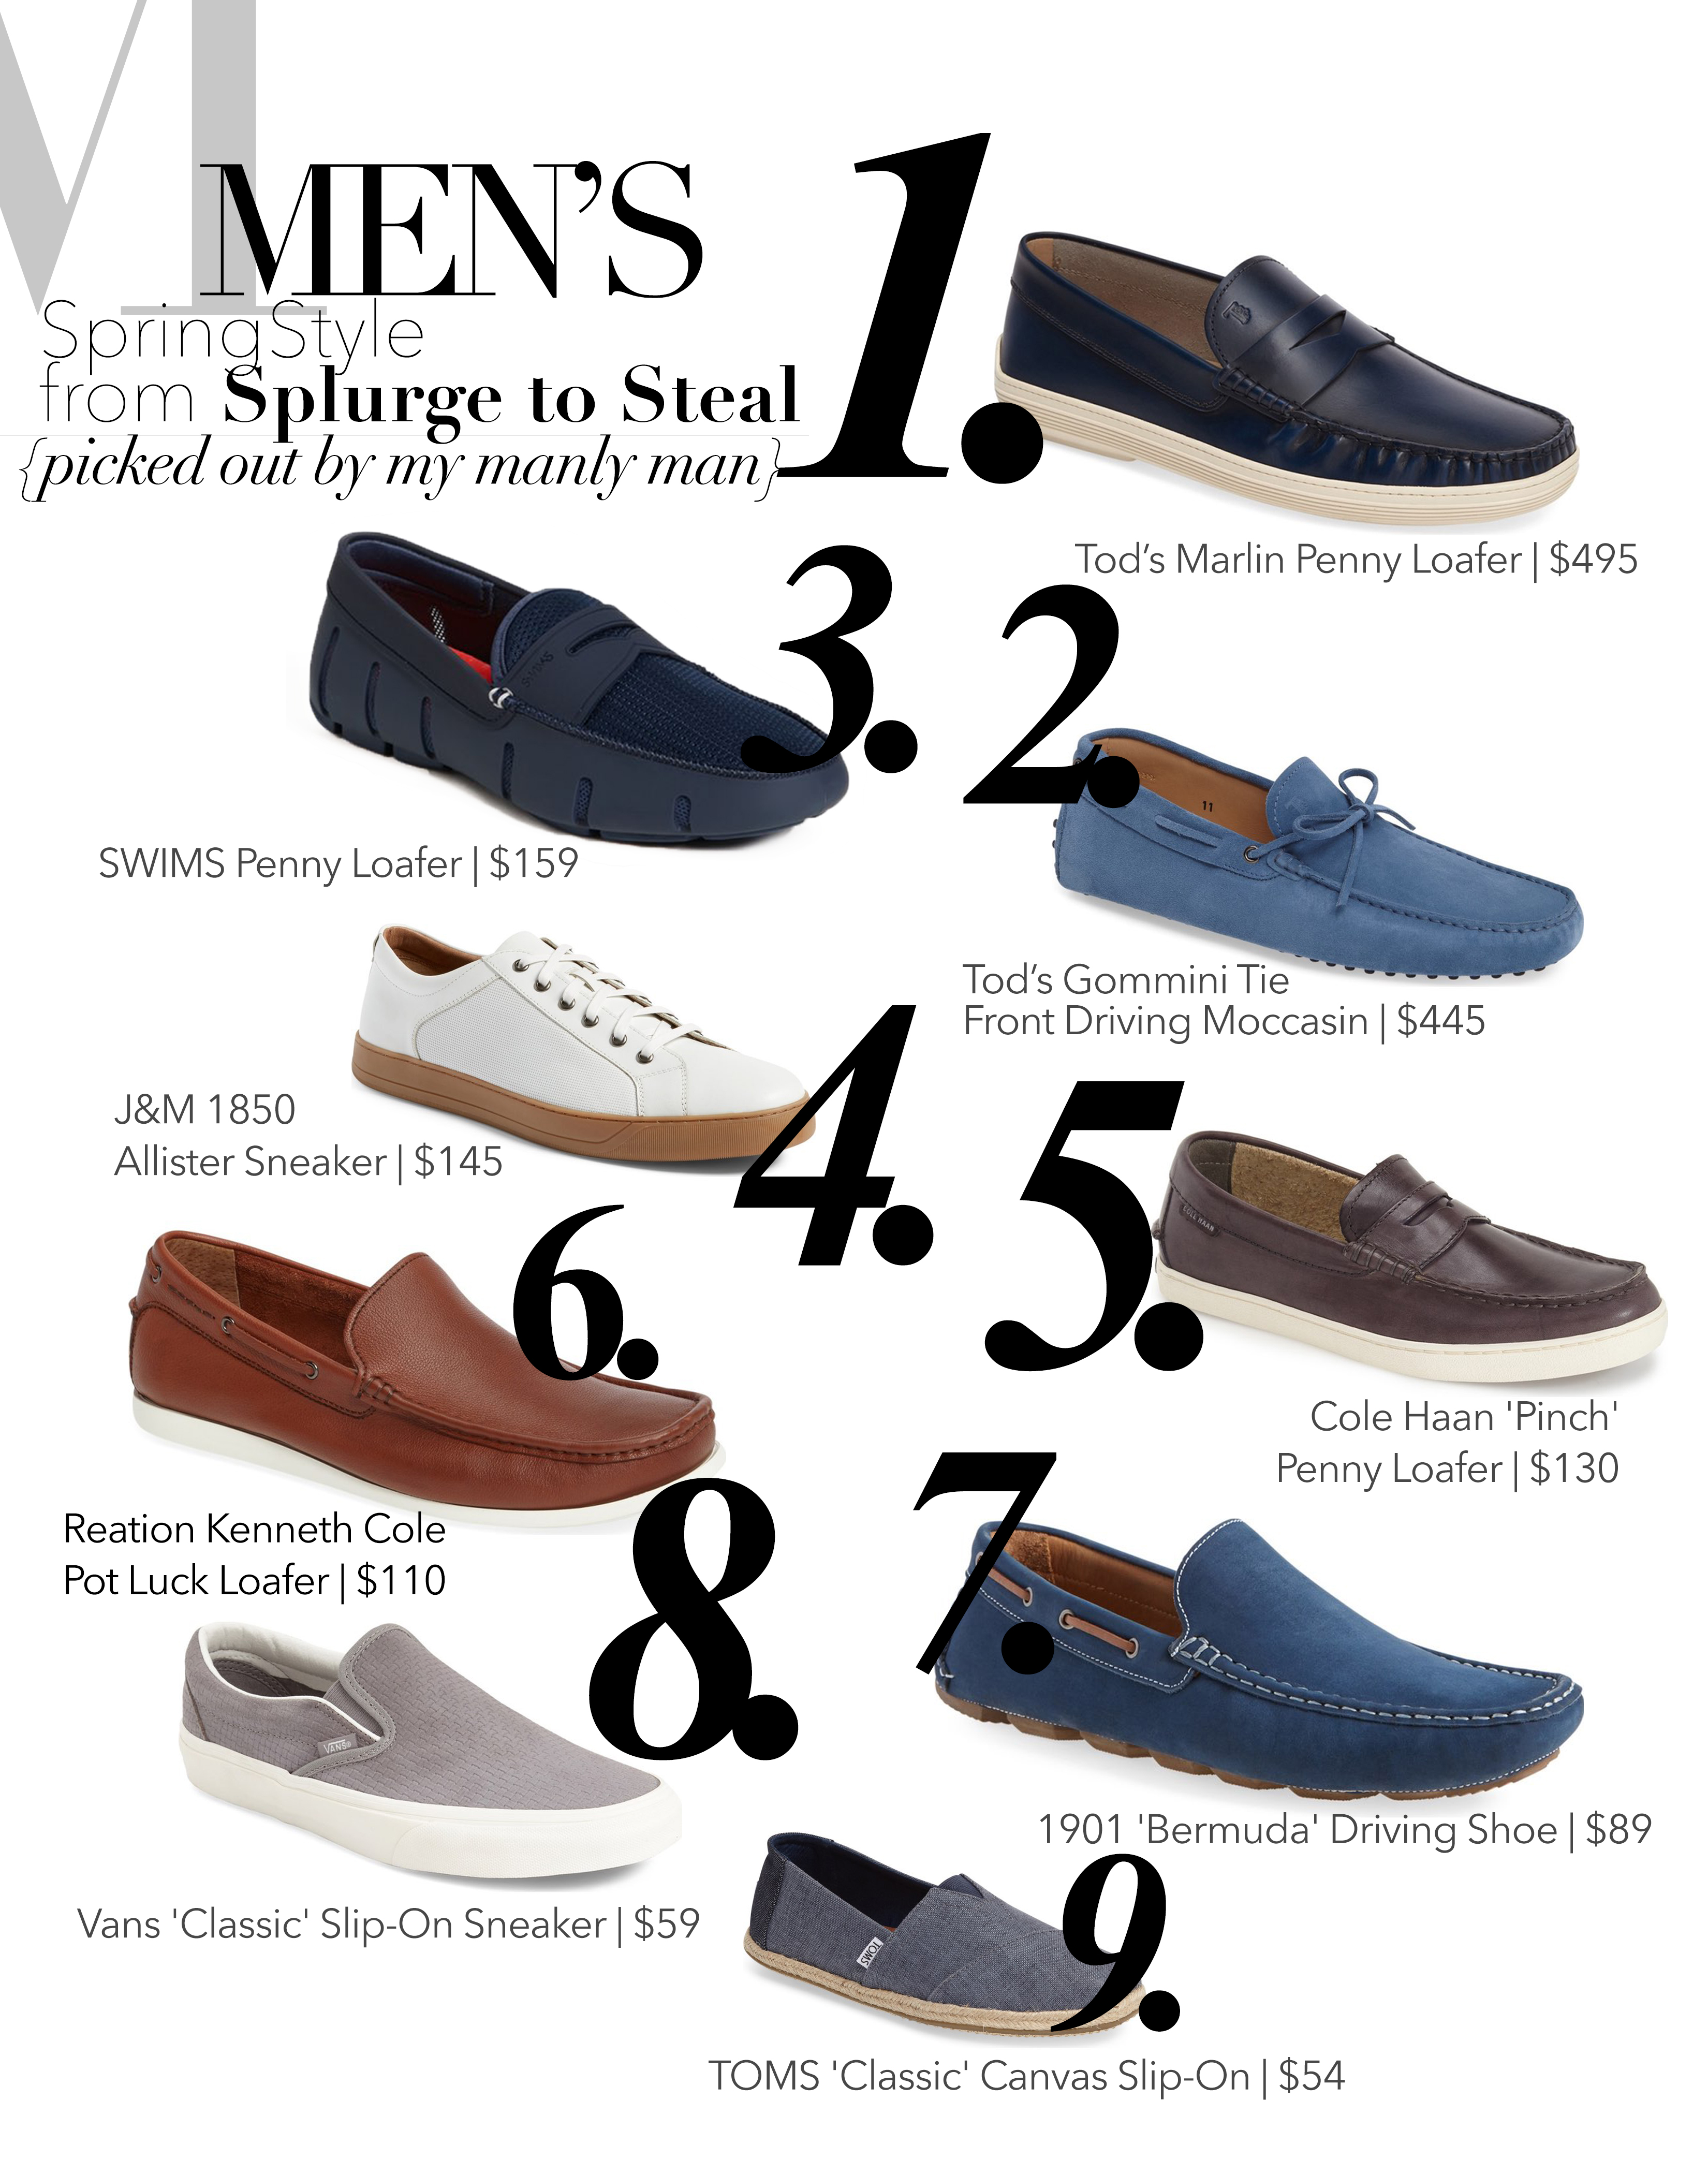 Men's Shoes: Move Over Flip Flops and Grey Sneakers!